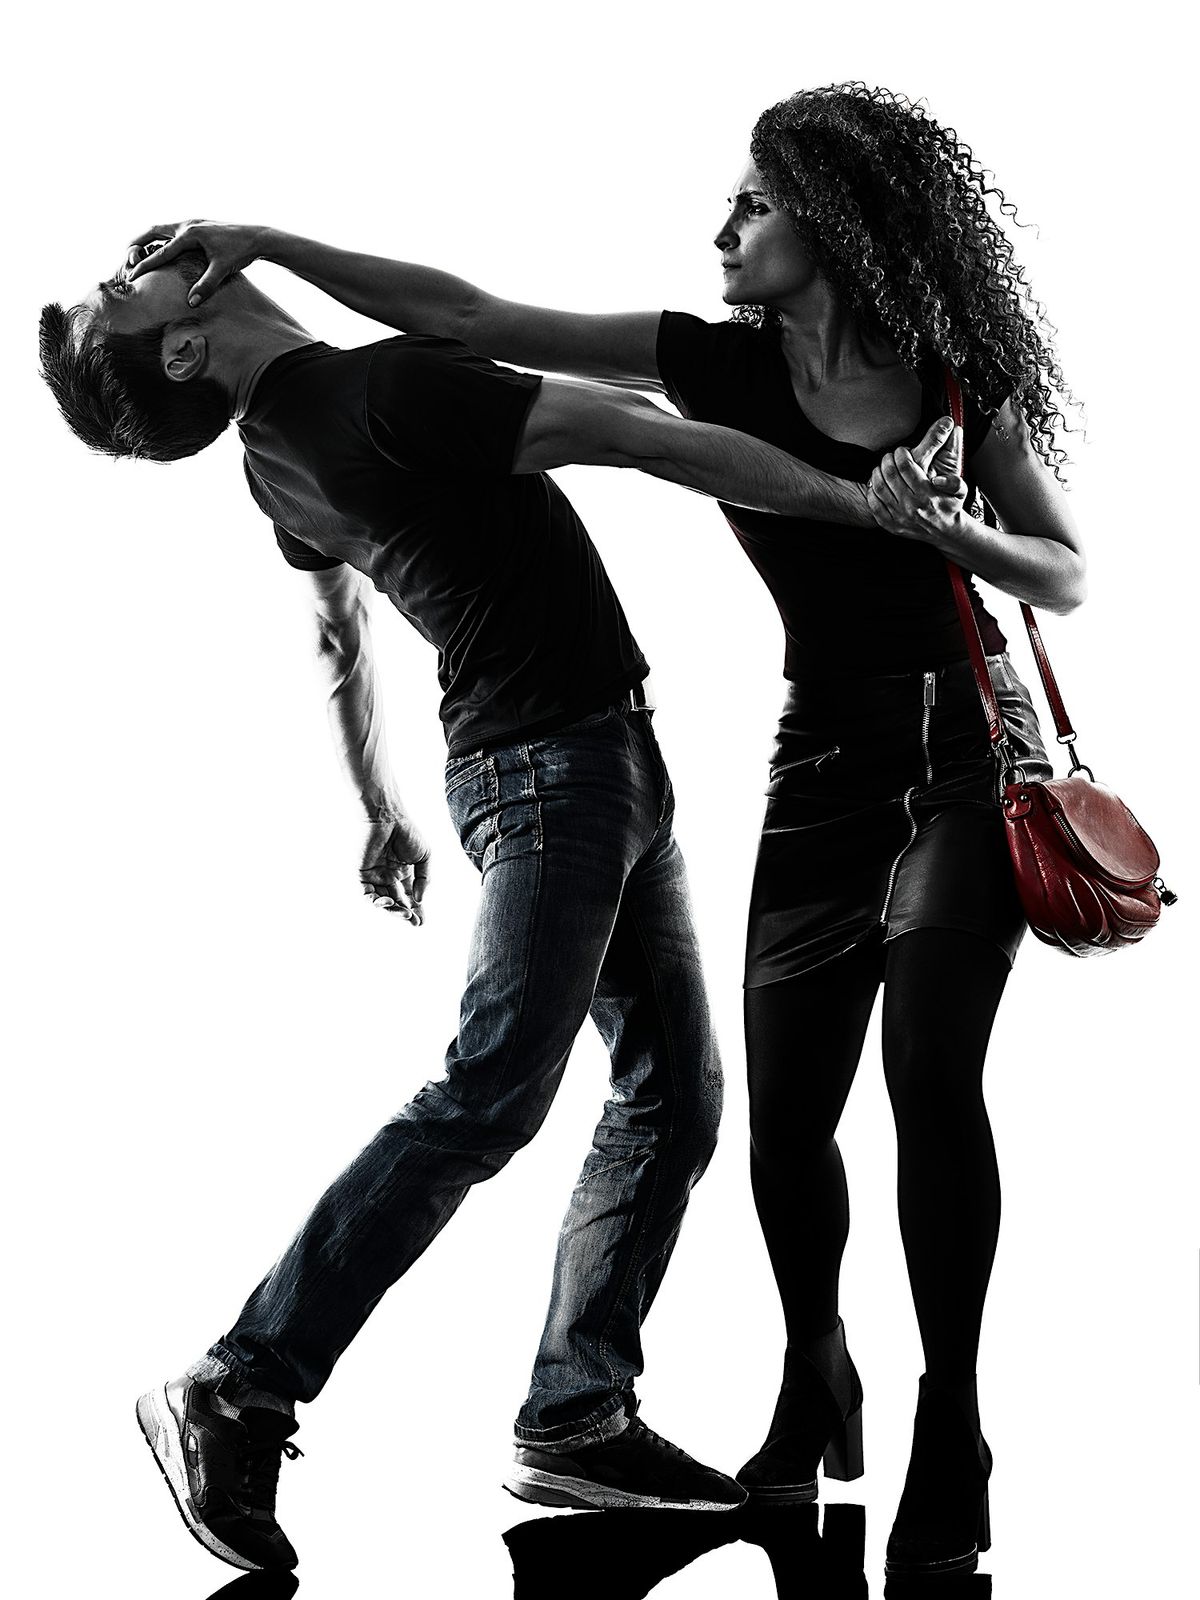 Women's and Teen's SELF DEFENSE & INTERNET SAFETY WORKSHOP